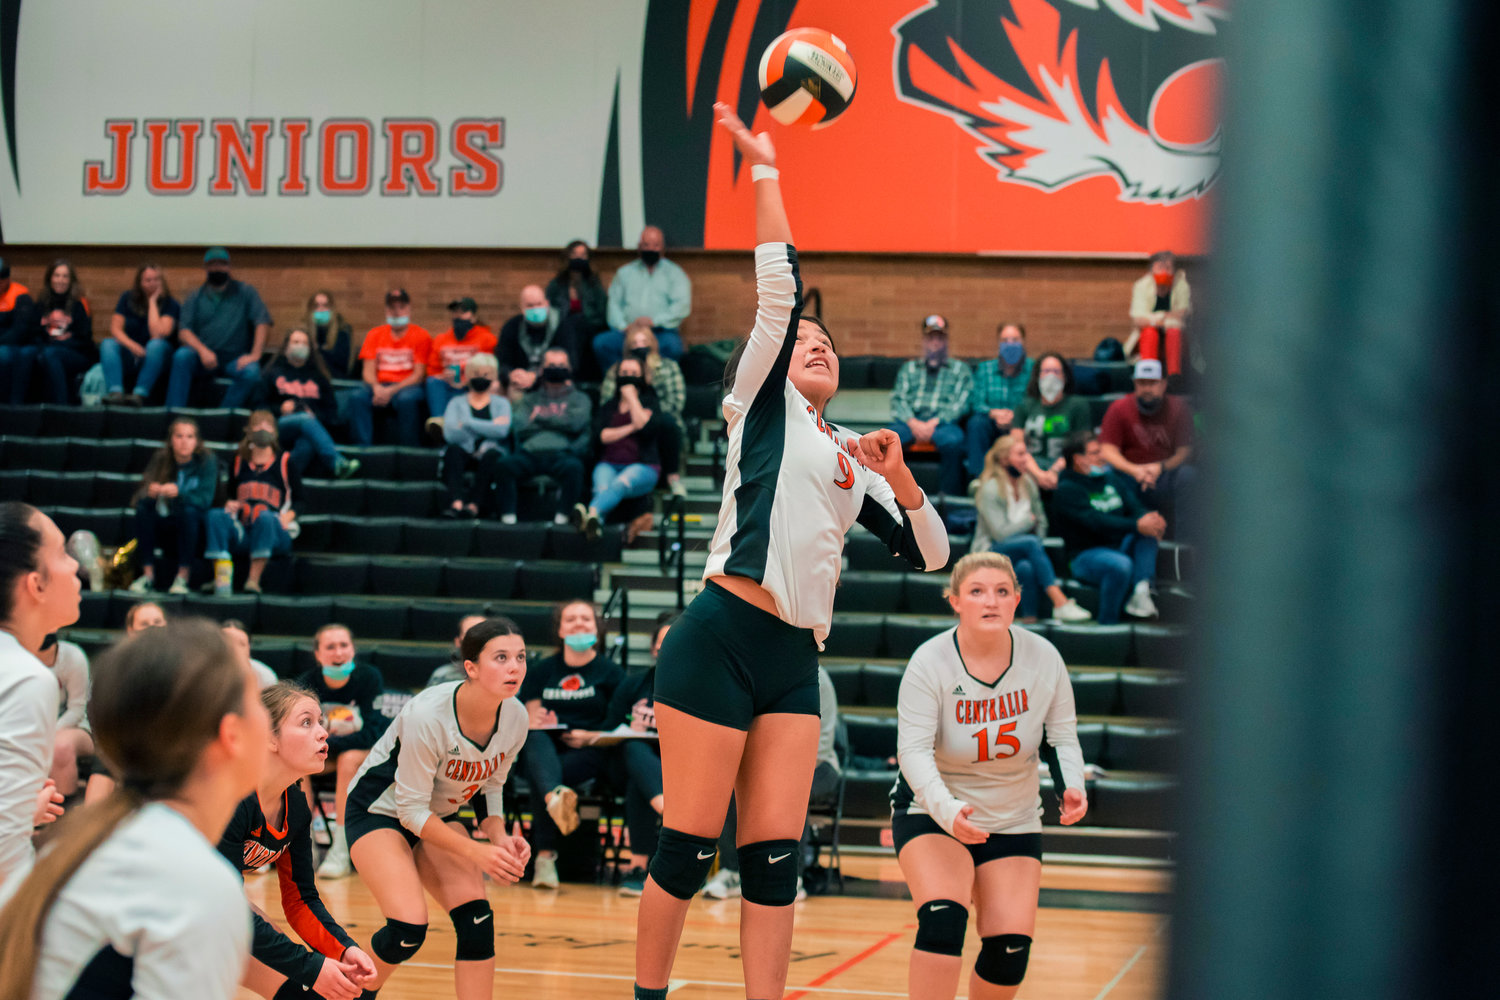 Centralia’s Makayla Chavez (9) goes up for the ball during a game against Tumwater Tuesday night.